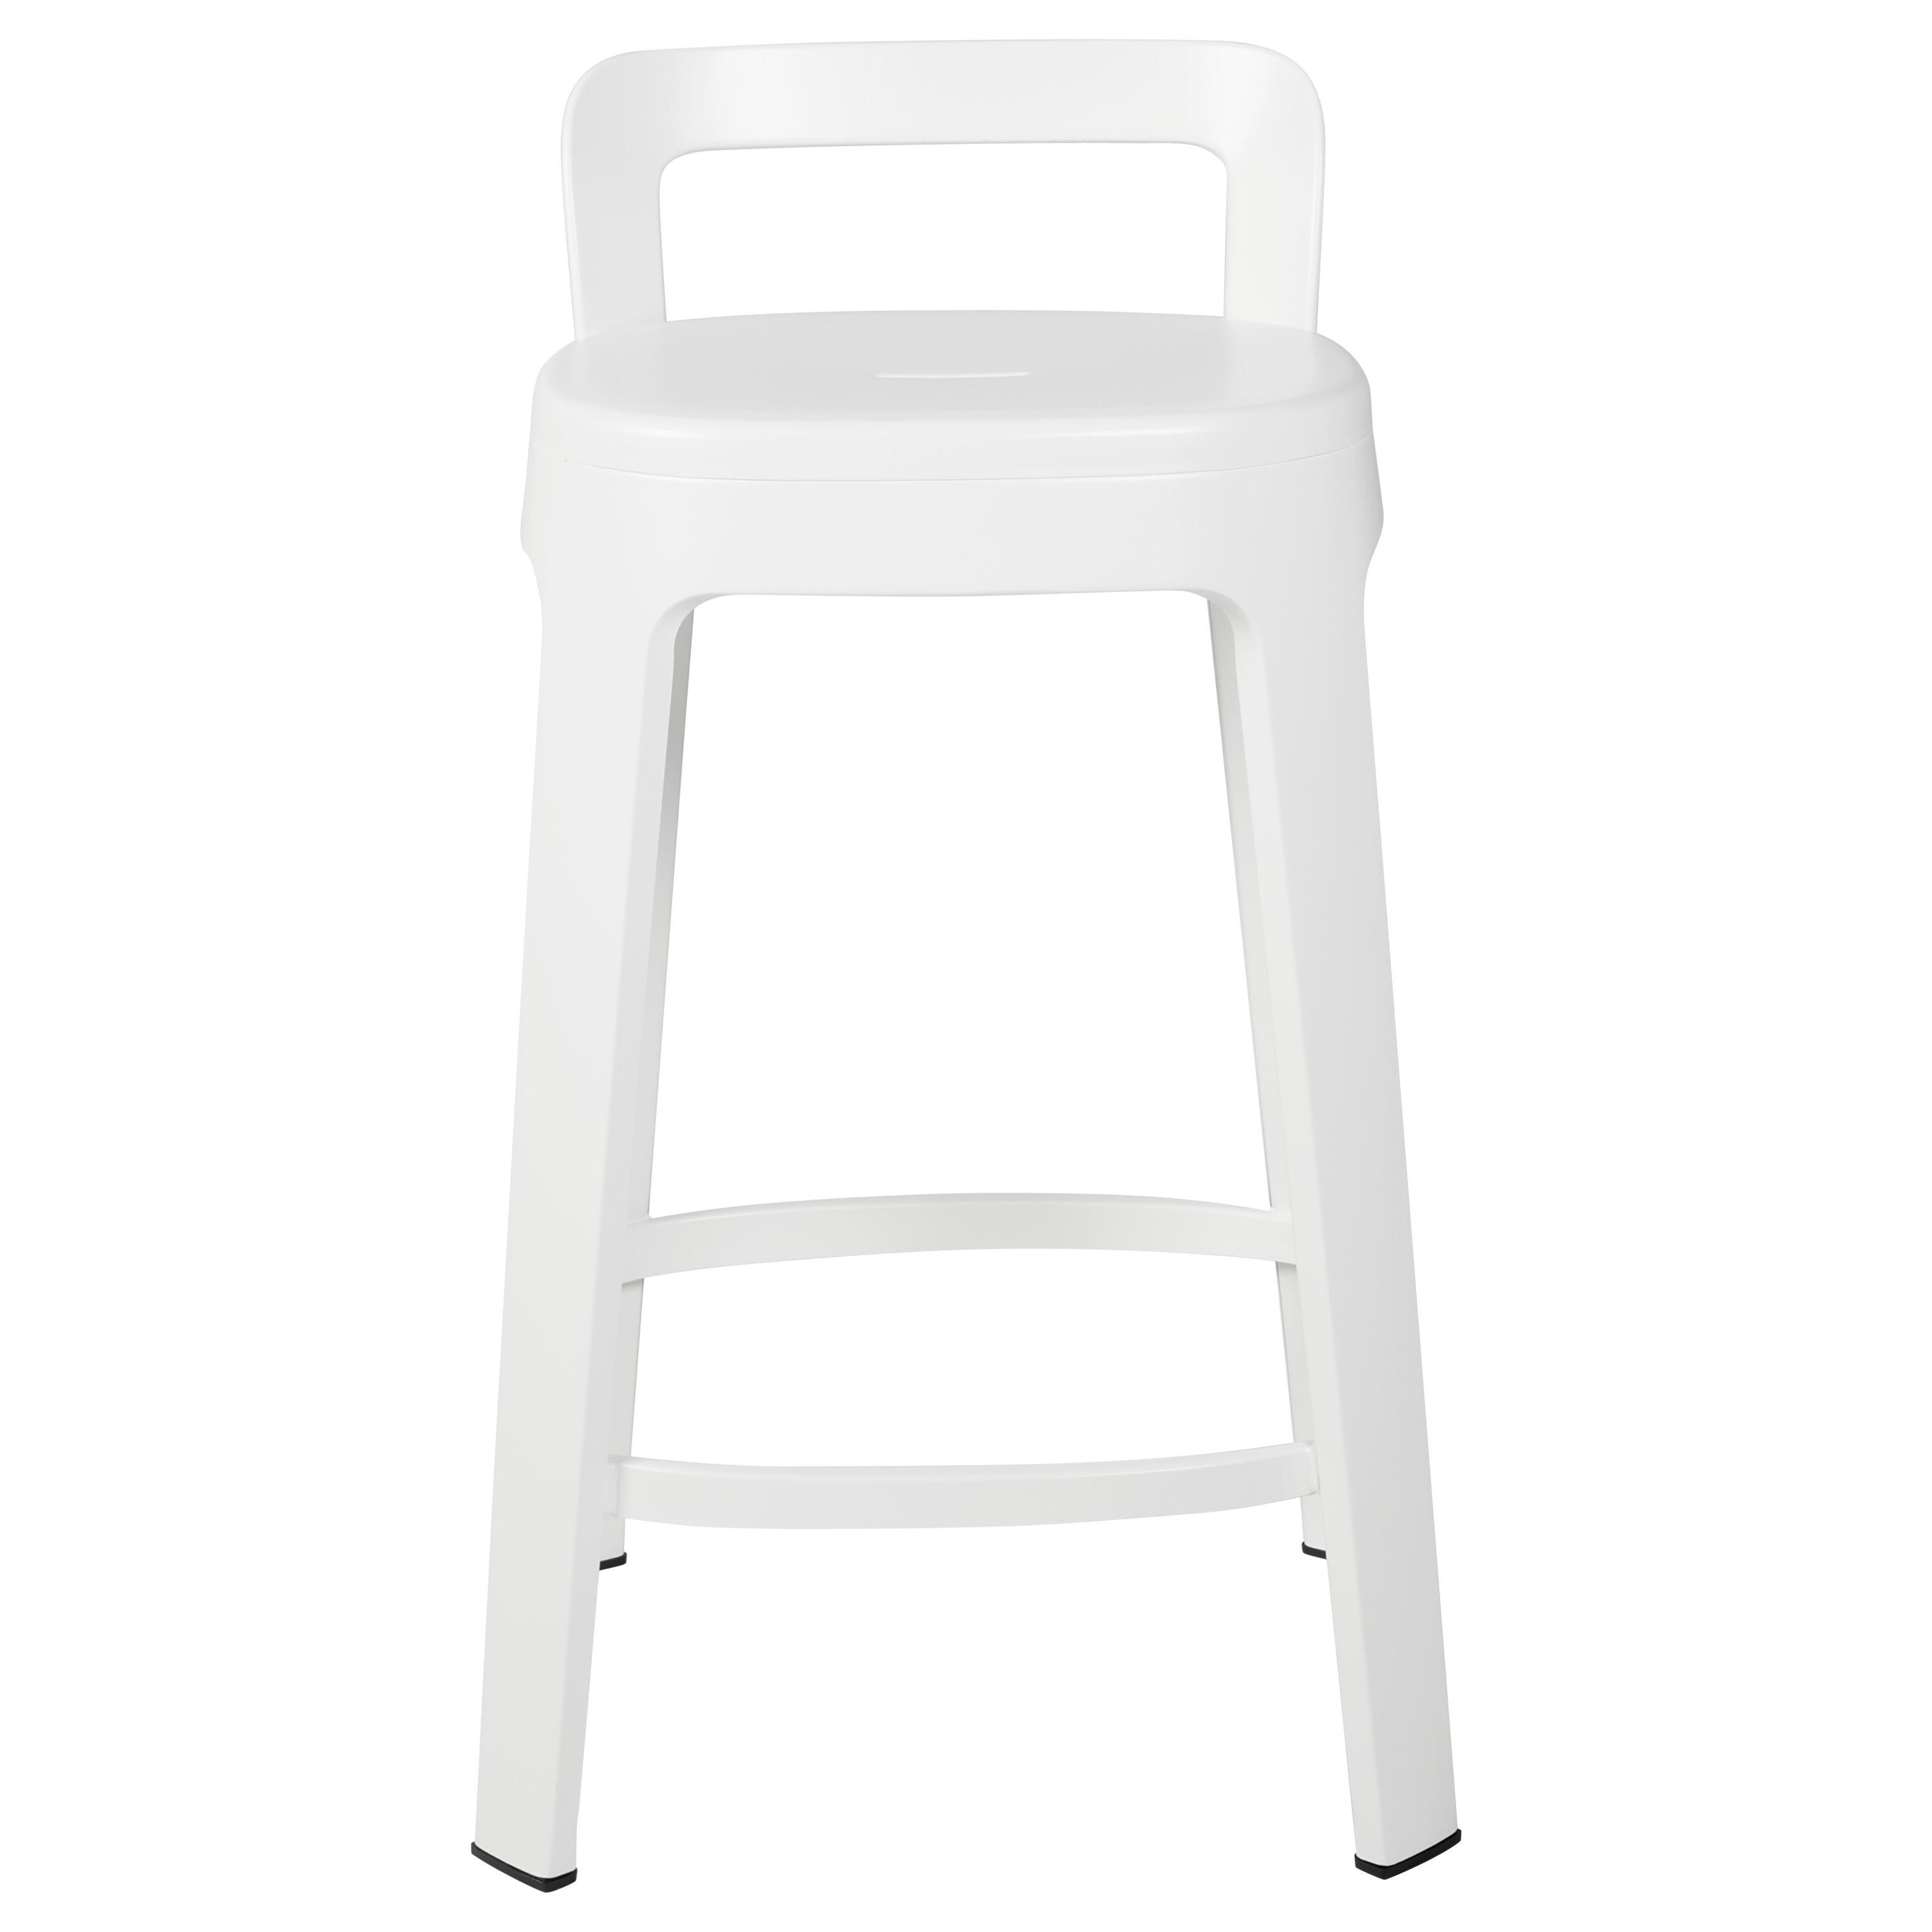 Ombra Counter Stool with Backrest, White by Emiliana Design Studio For Sale